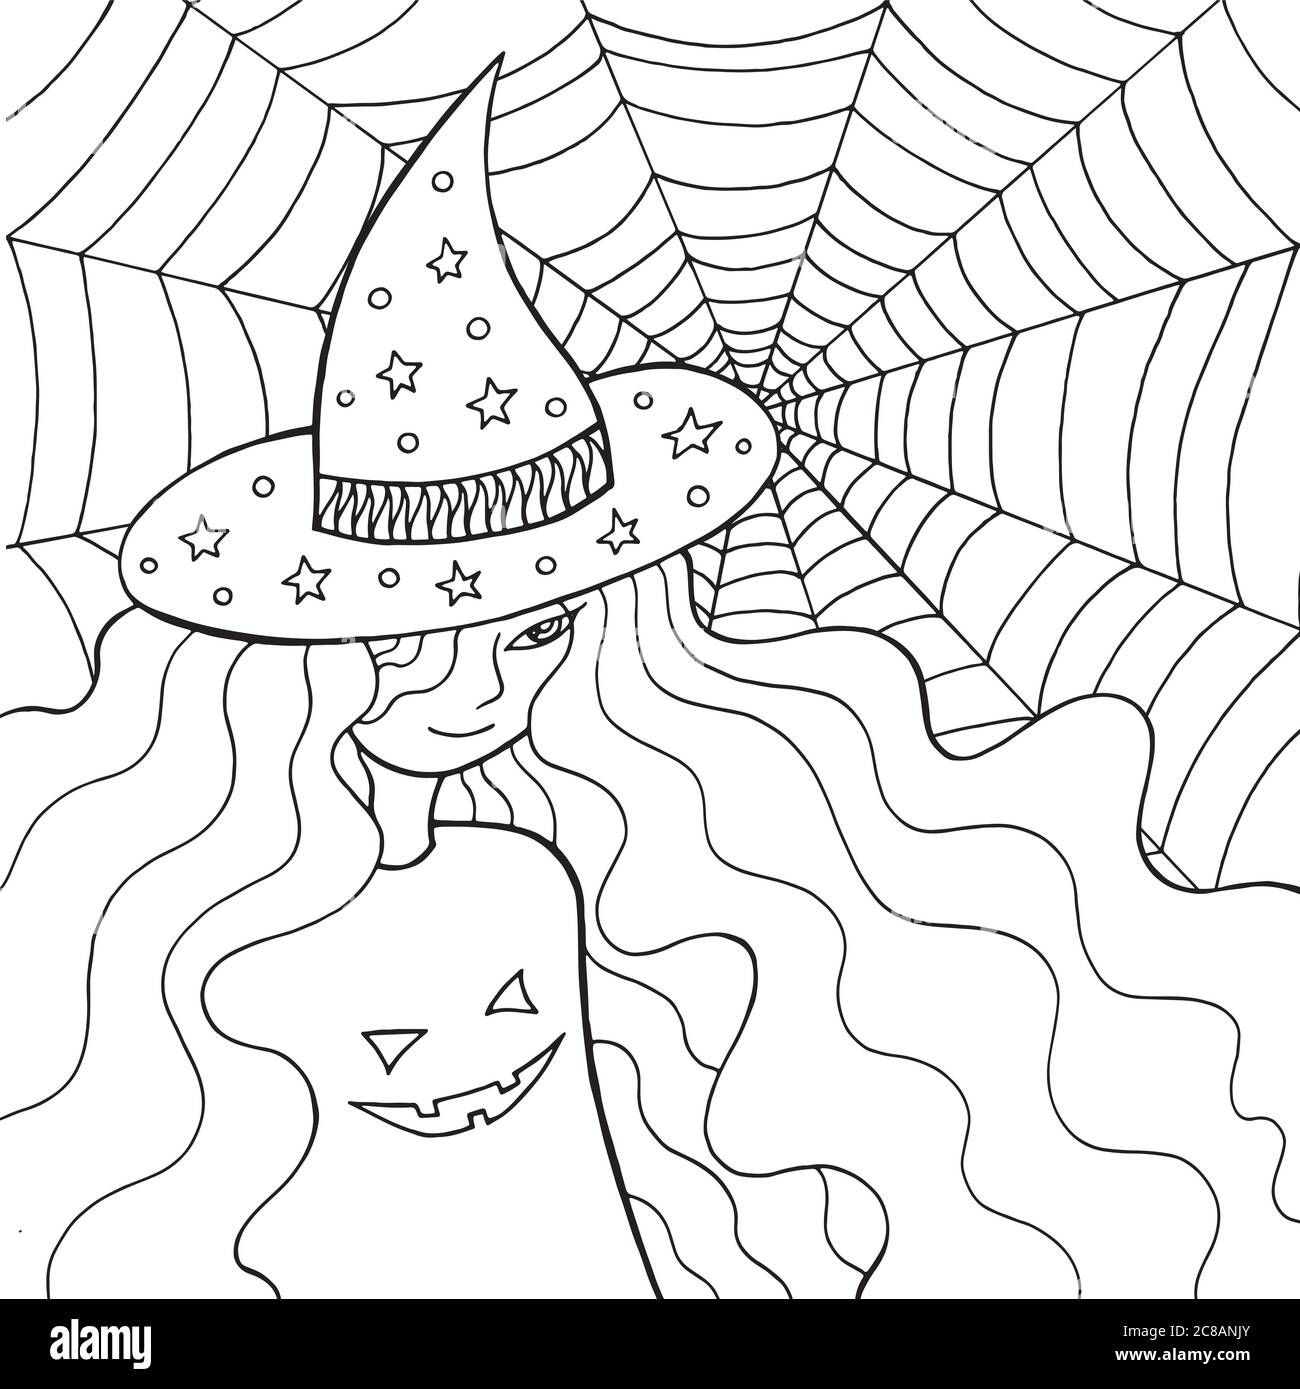 Witch girl in the hat and web doodle coloring page for adults about halloween vector illustration stock vector image art